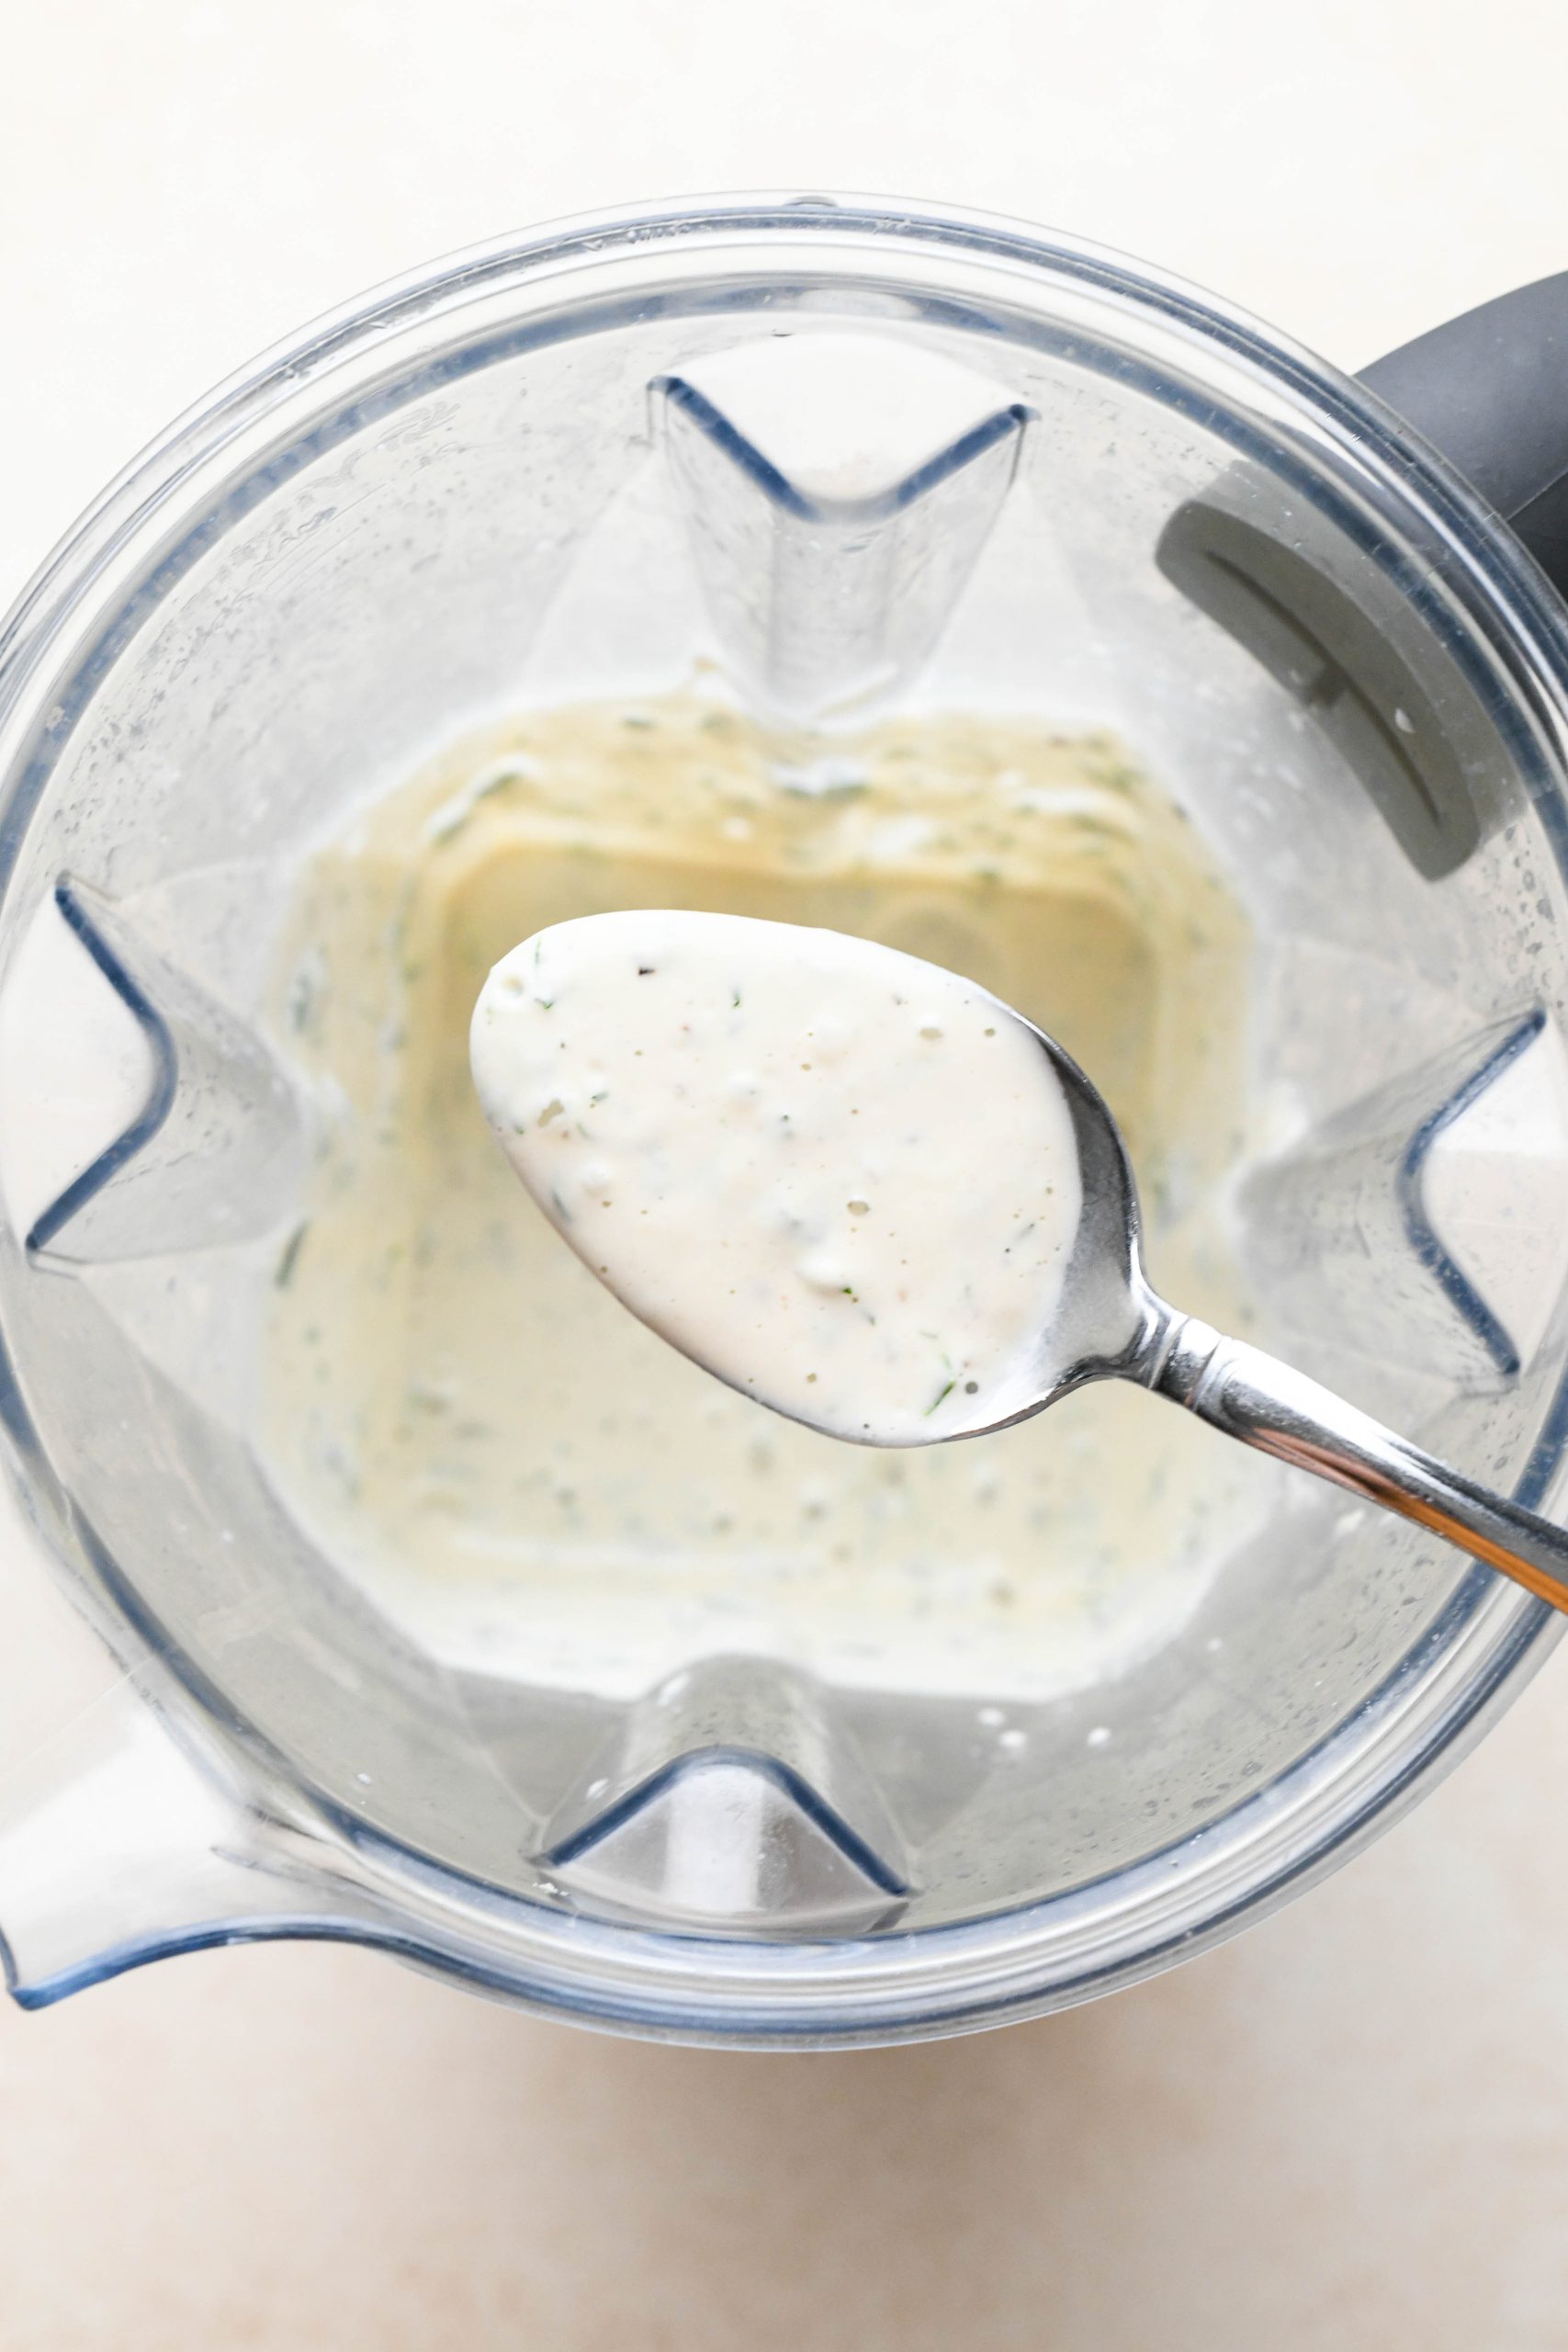 How to make vegan ranch dressing: Herbs and pepper pulsed into blended cashews in blender container.